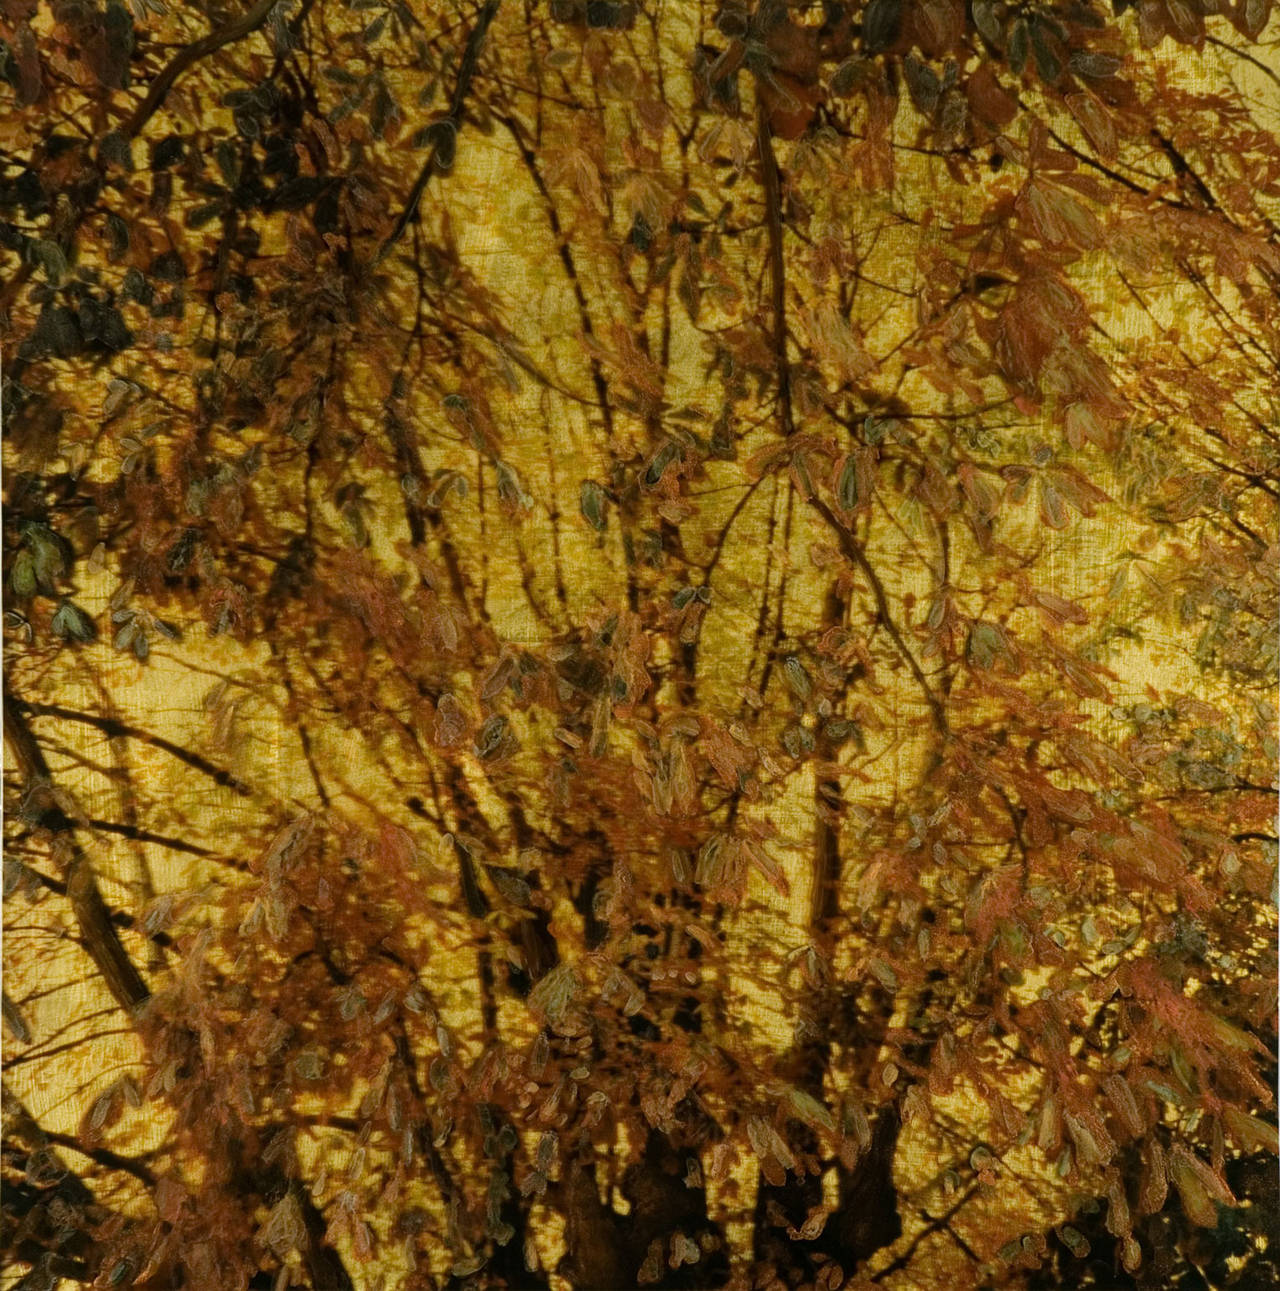 NO. 165, depiction of trees, nature, gold, brown, branches of tree, leaves - Mixed Media Art by Susan Goldsmith